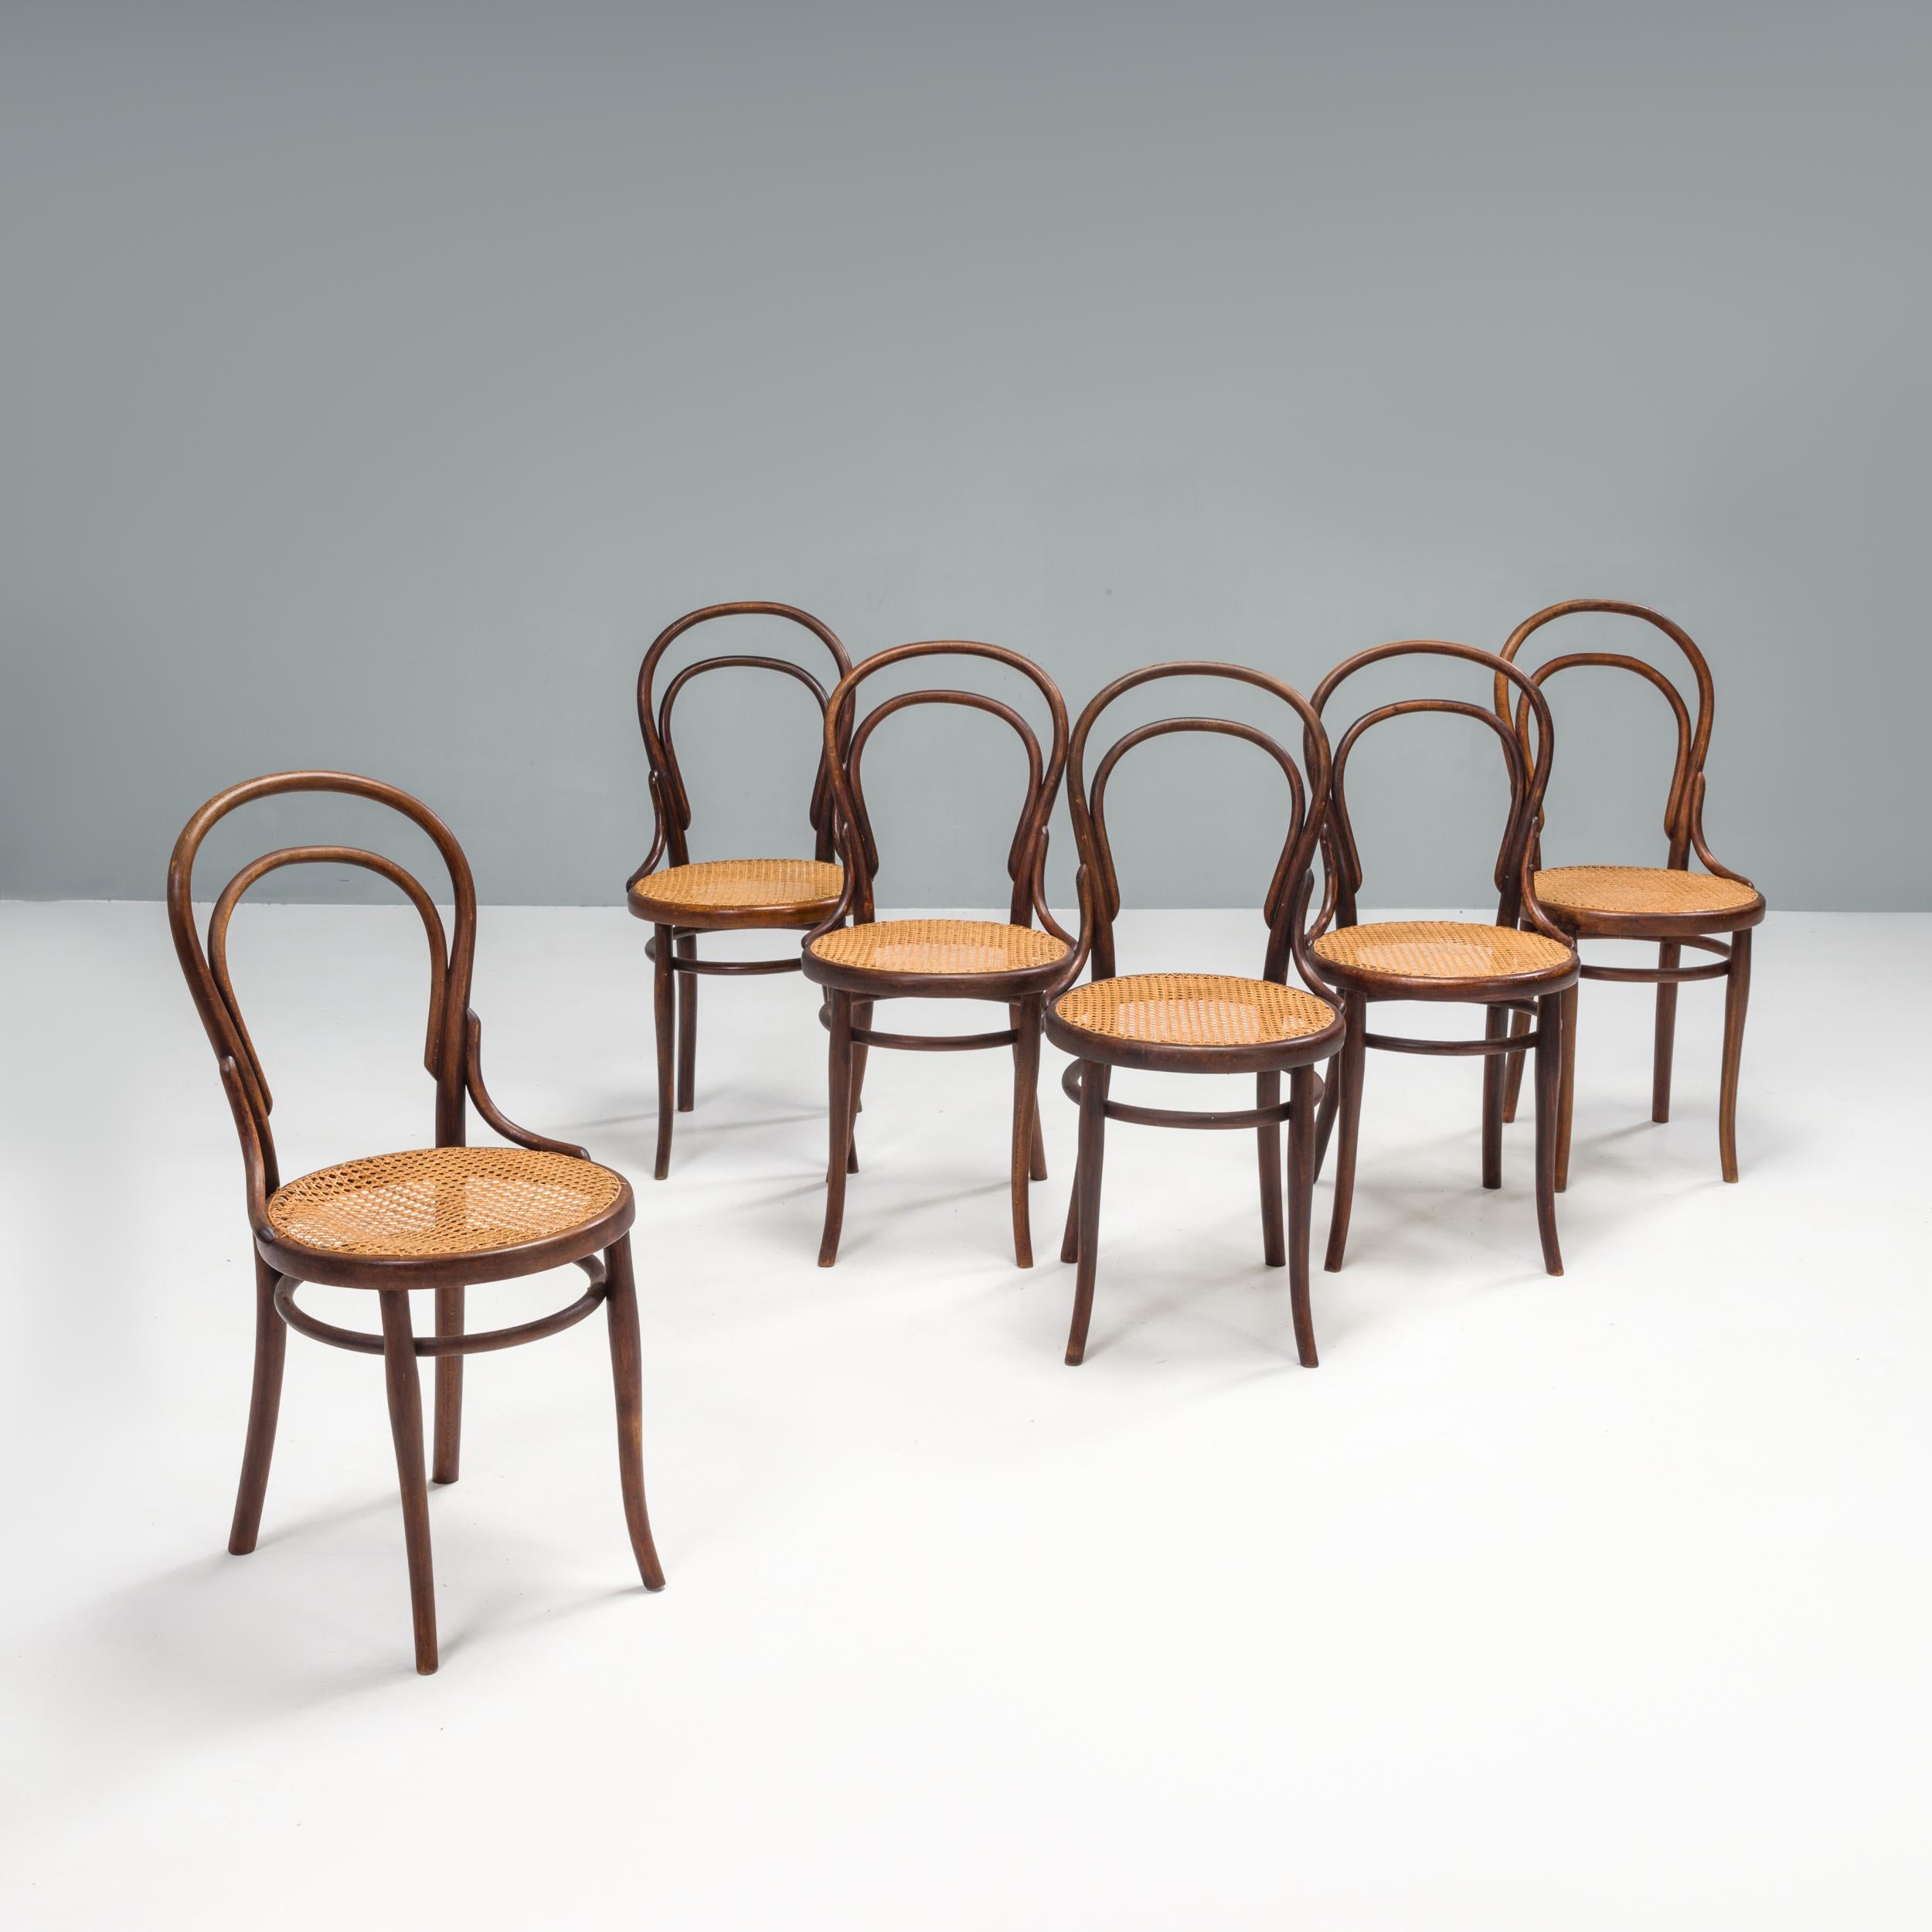 After years of experimentation and technical advancements, Michel Thonet produced the first No. 14 chair in 1859. Since then it has become one of the most recognisable and mass produced pieces of furniture of the 19th century and